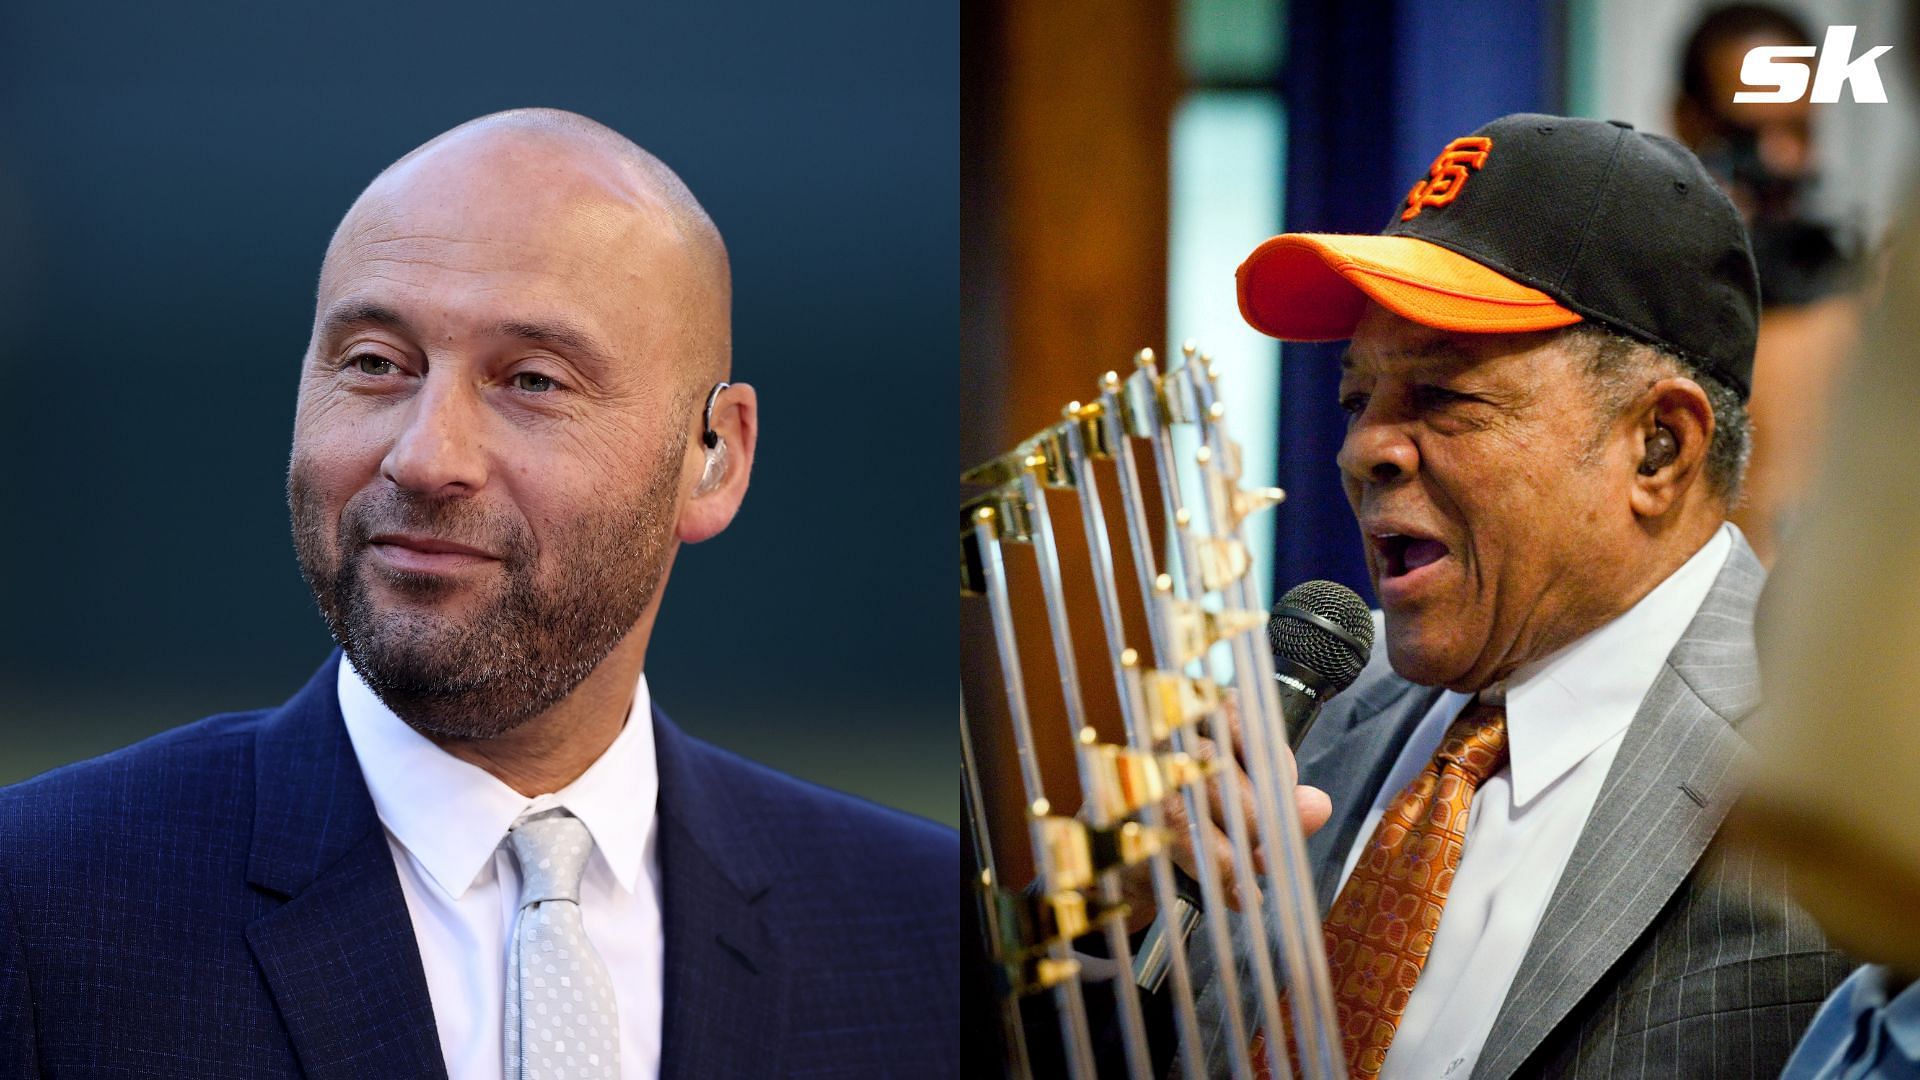 &quot;One of the best to ever play the game&quot; - Yankees icon Derek Jeter releases heartfelt statement on HOFer Willie Mays